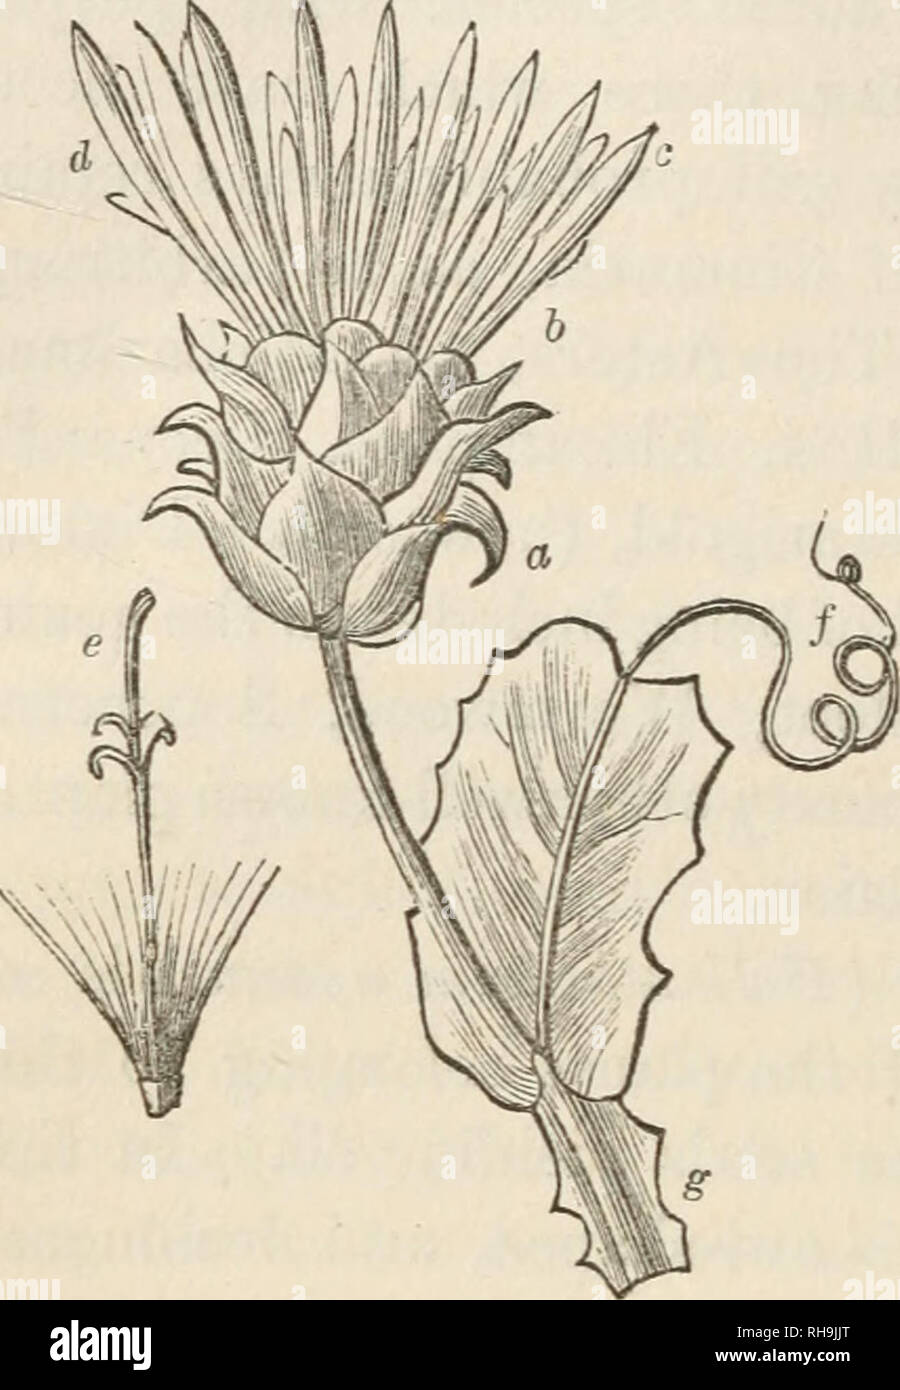 . Botany for ladies; or, A popular introduction to the natural system of plants, according to the classification of De Candolle. Plants -- Classification. 108 LABIAT^FLORtE. [part I. the singularity of their formation. Mutisia latifolia (see fig. 46) has a large, woolly involucre, the | A ^ scales of which are {il) i] I I /] A of two kinds, the VA ., t./' //^' outer ones, (a), being pointed and leaf-like, and the inner ones, (^), having the ap- pearance of scaly bracts. The flo- rets of the ray, (c), are narrow, and spreading in the fully expand- ed flower; and those of the disk, (f/), are s Stock Photo